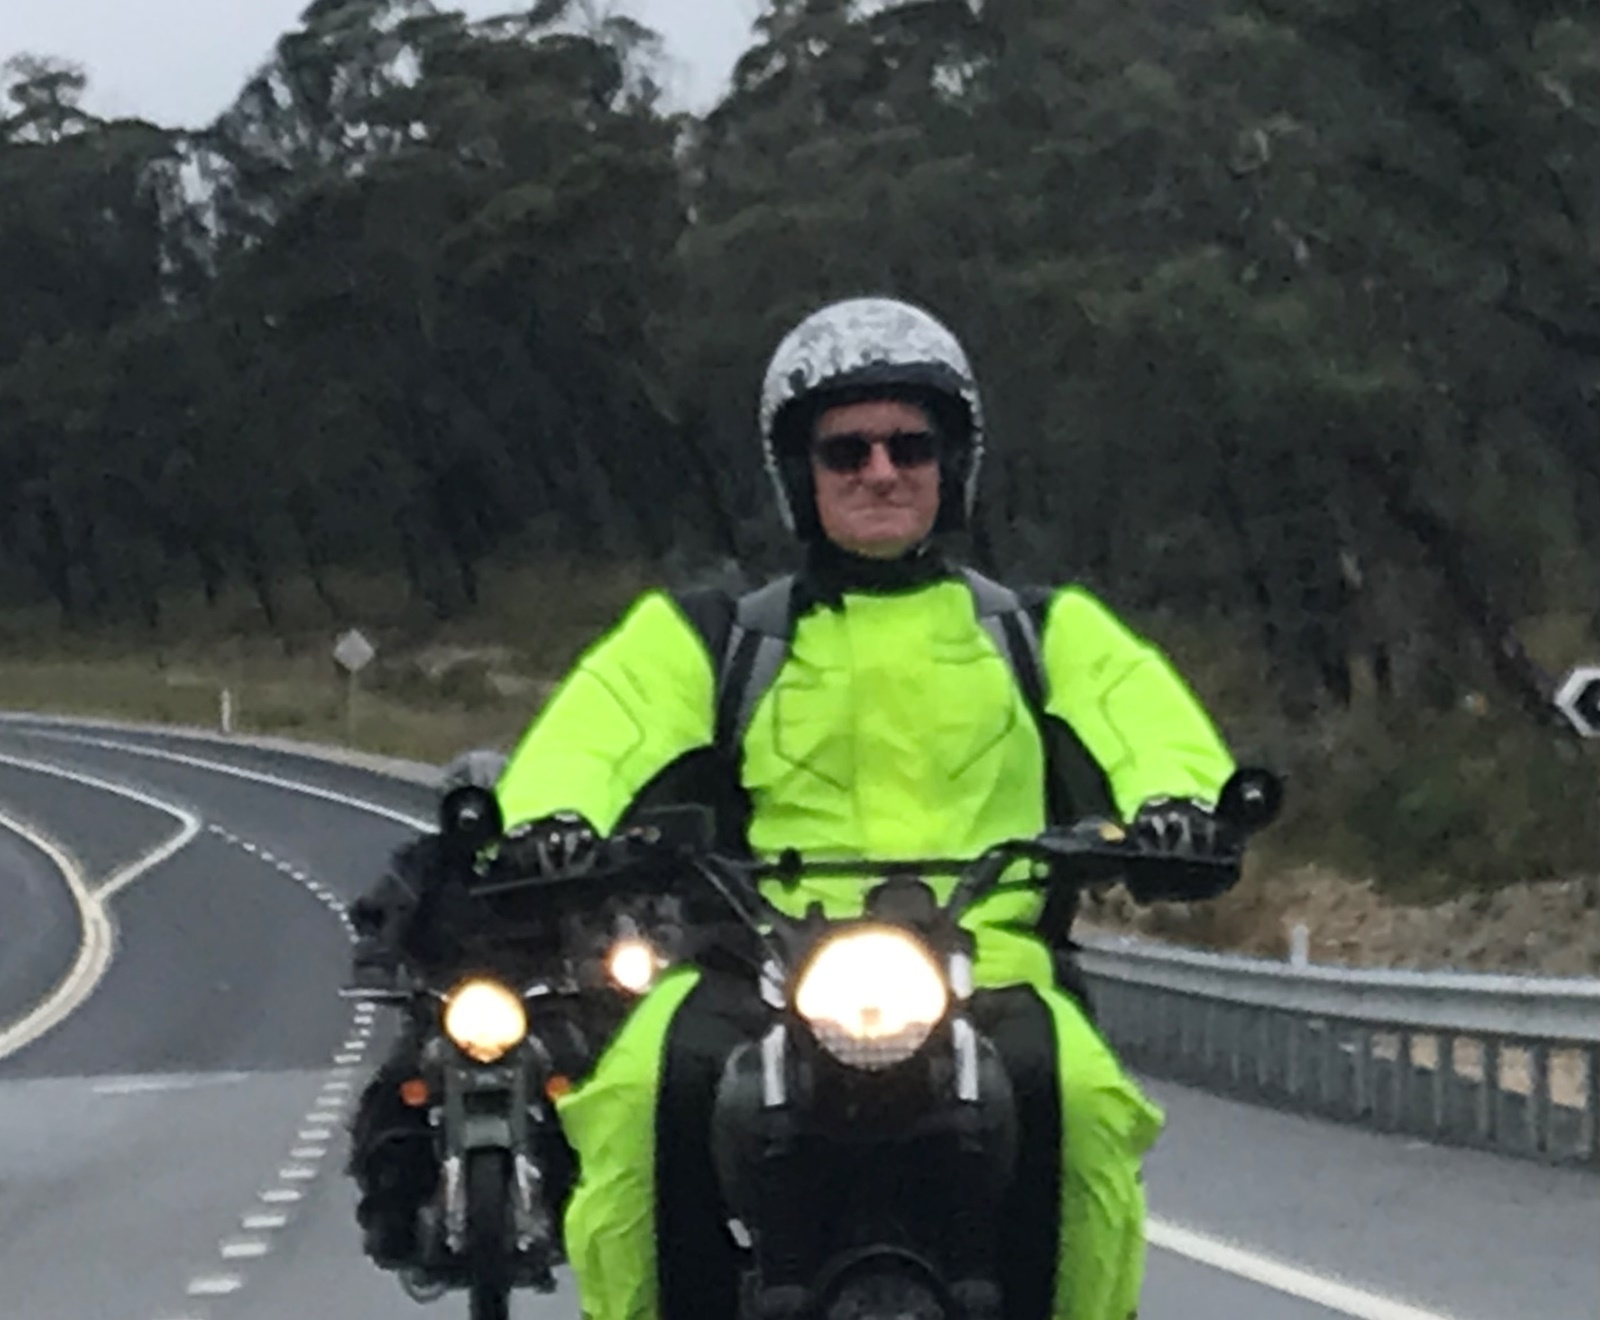 A person riding a motorcycle

Description automatically generated with medium confidence